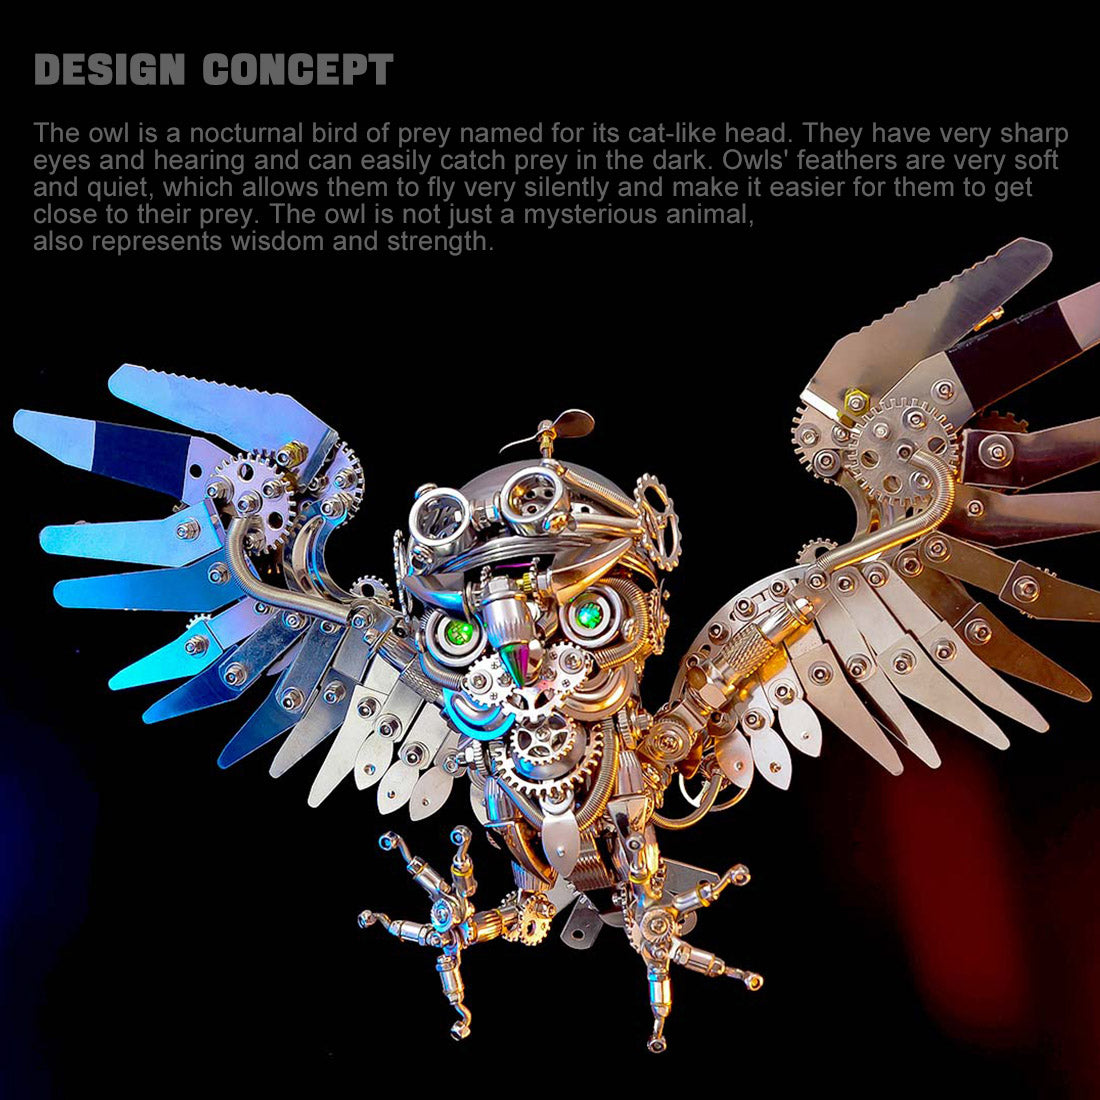 Steampunk Owl with Goggles DIY 3D Metal Animal Model Kits 700+PCS Difficult Puzzle